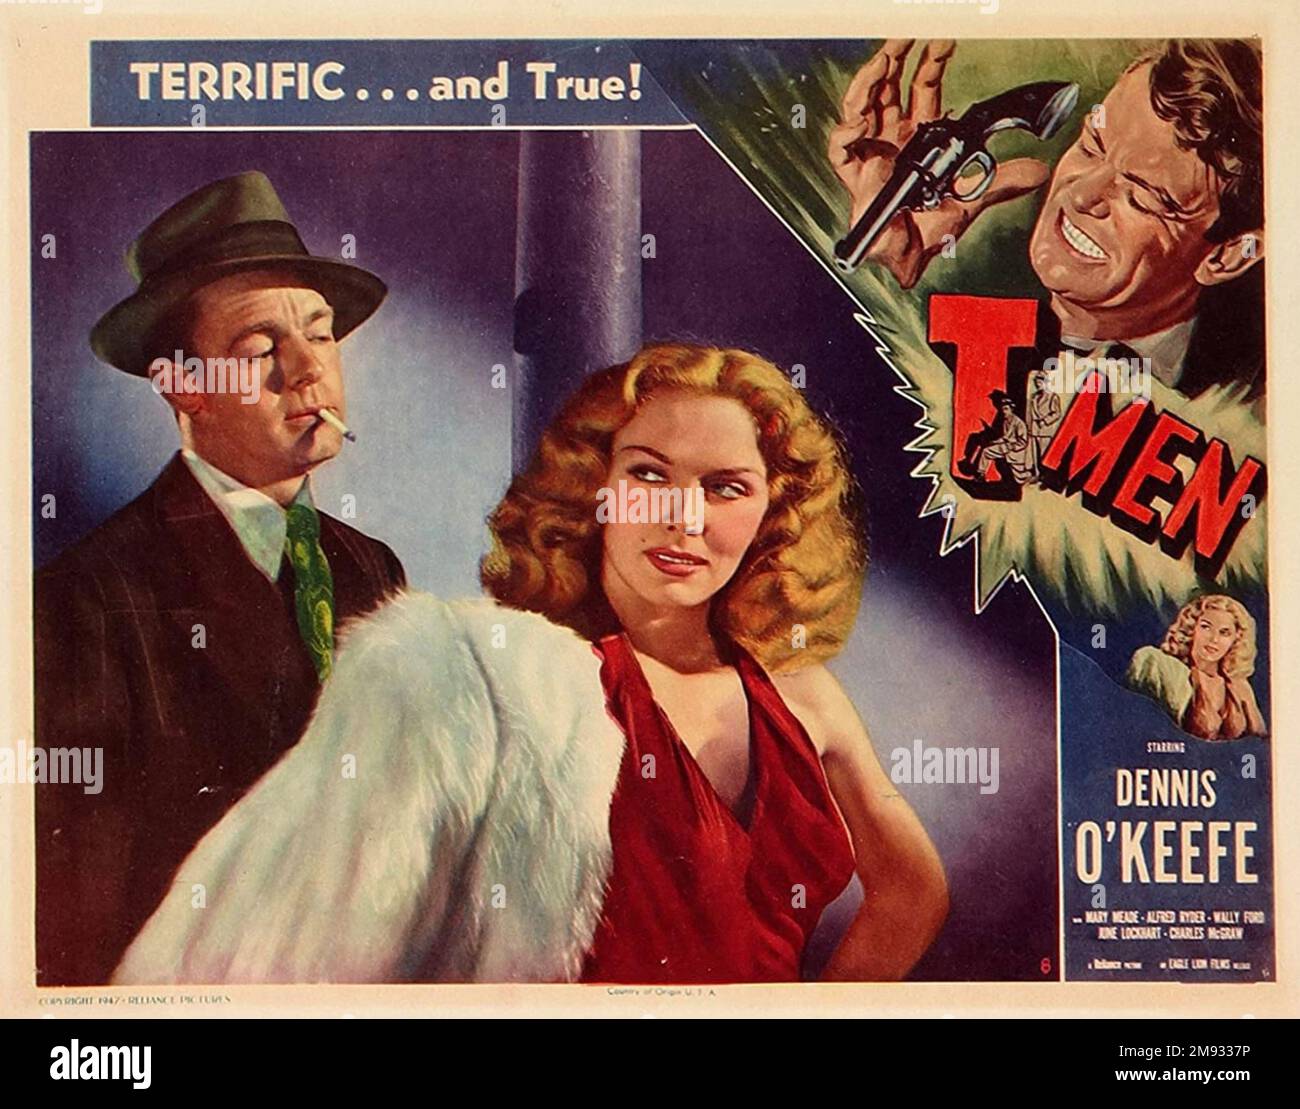 T-MEN 1947 Eagle Lion Films production with Mary Meade Stock Photo